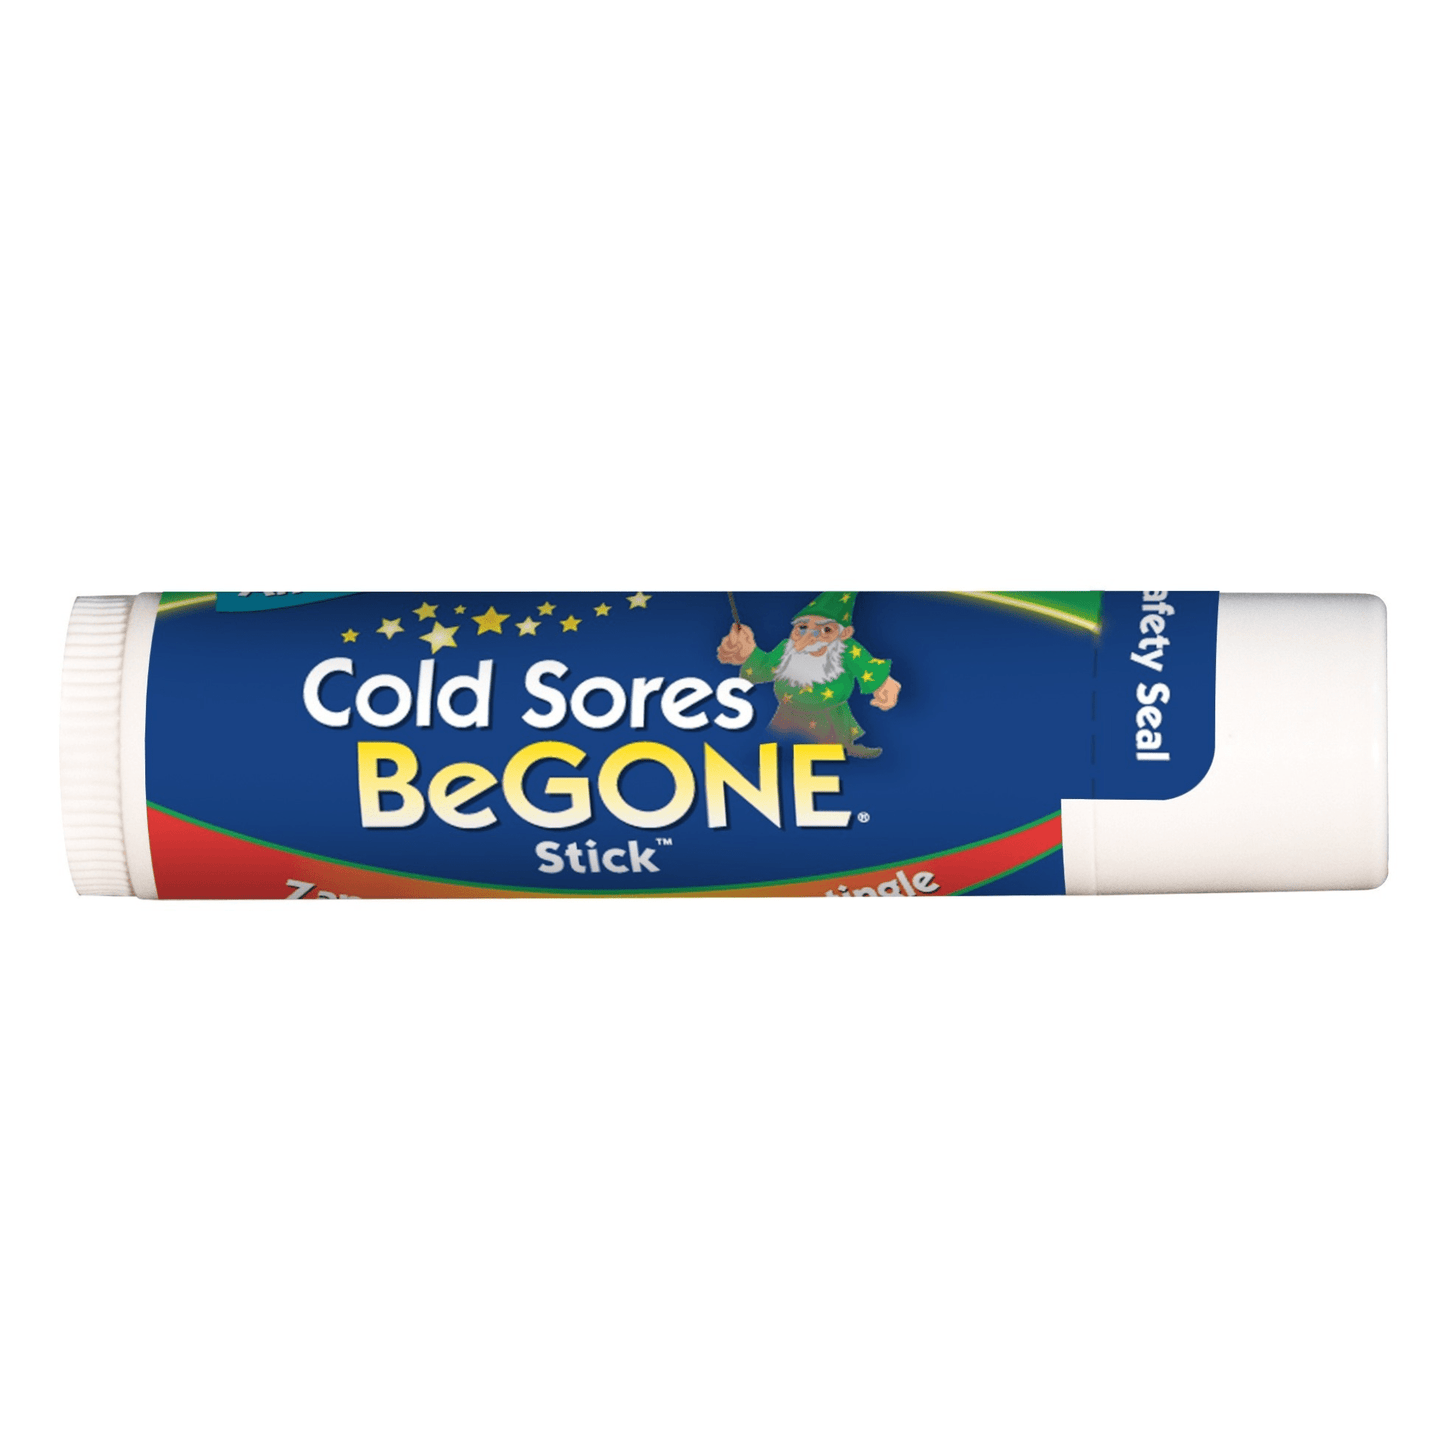 Primary Image of Cold Sore Begone Stick